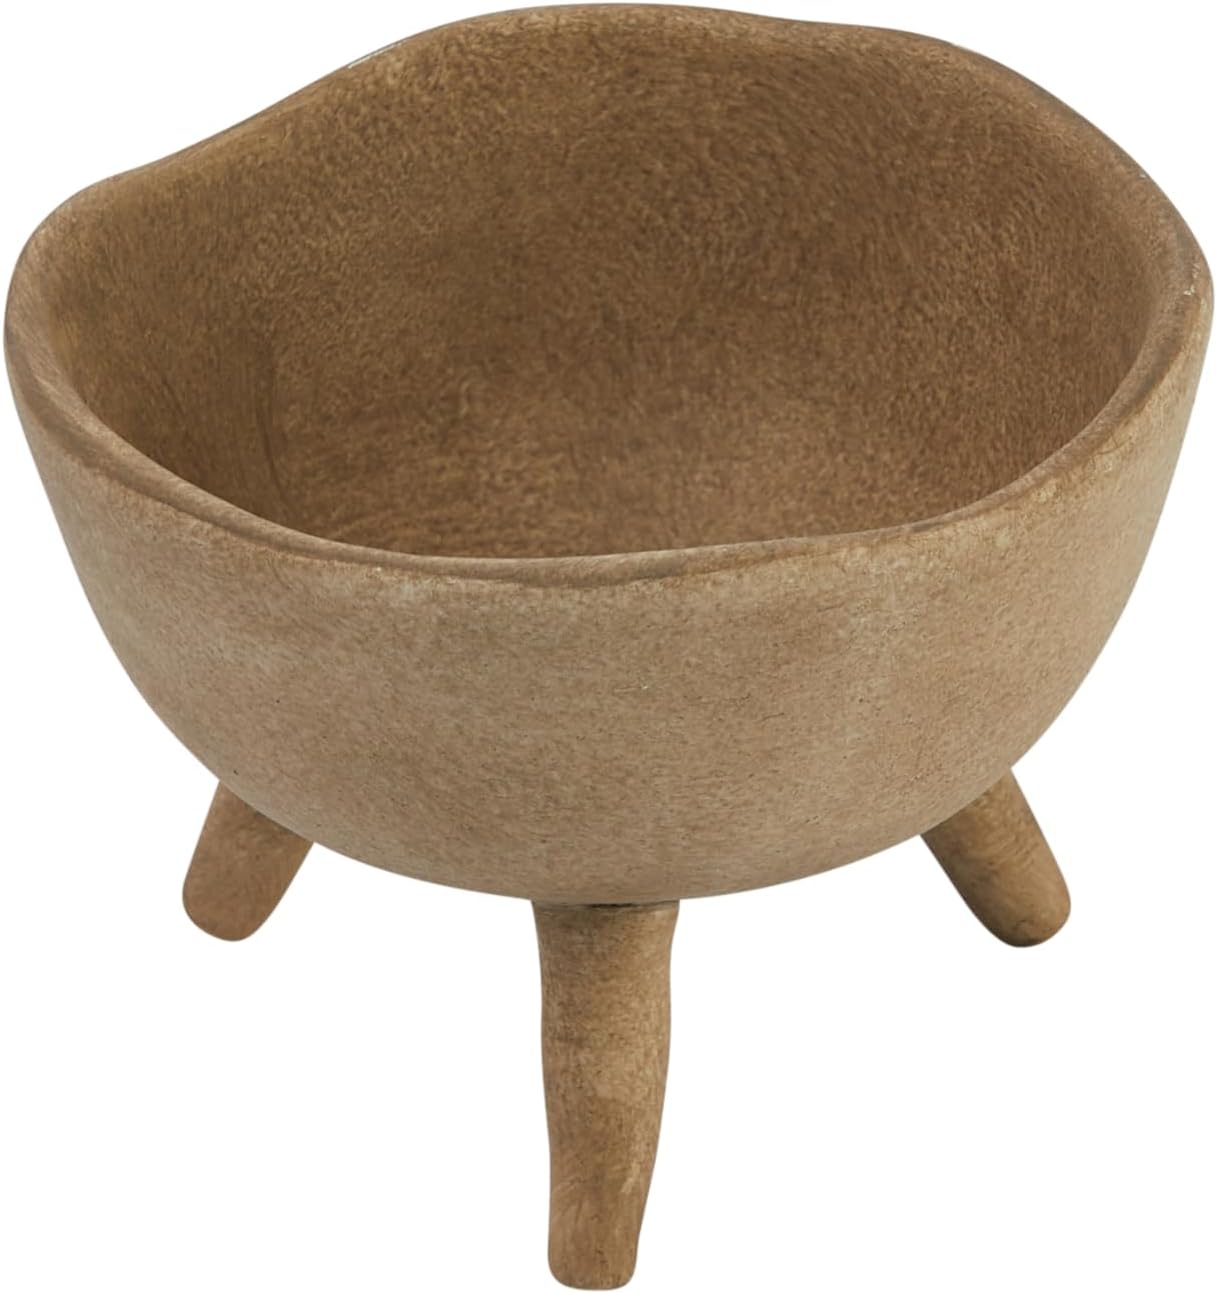 Creative CoOp Boho Terracotta Footed Planter with Organic E - New York - Albany ID1539369